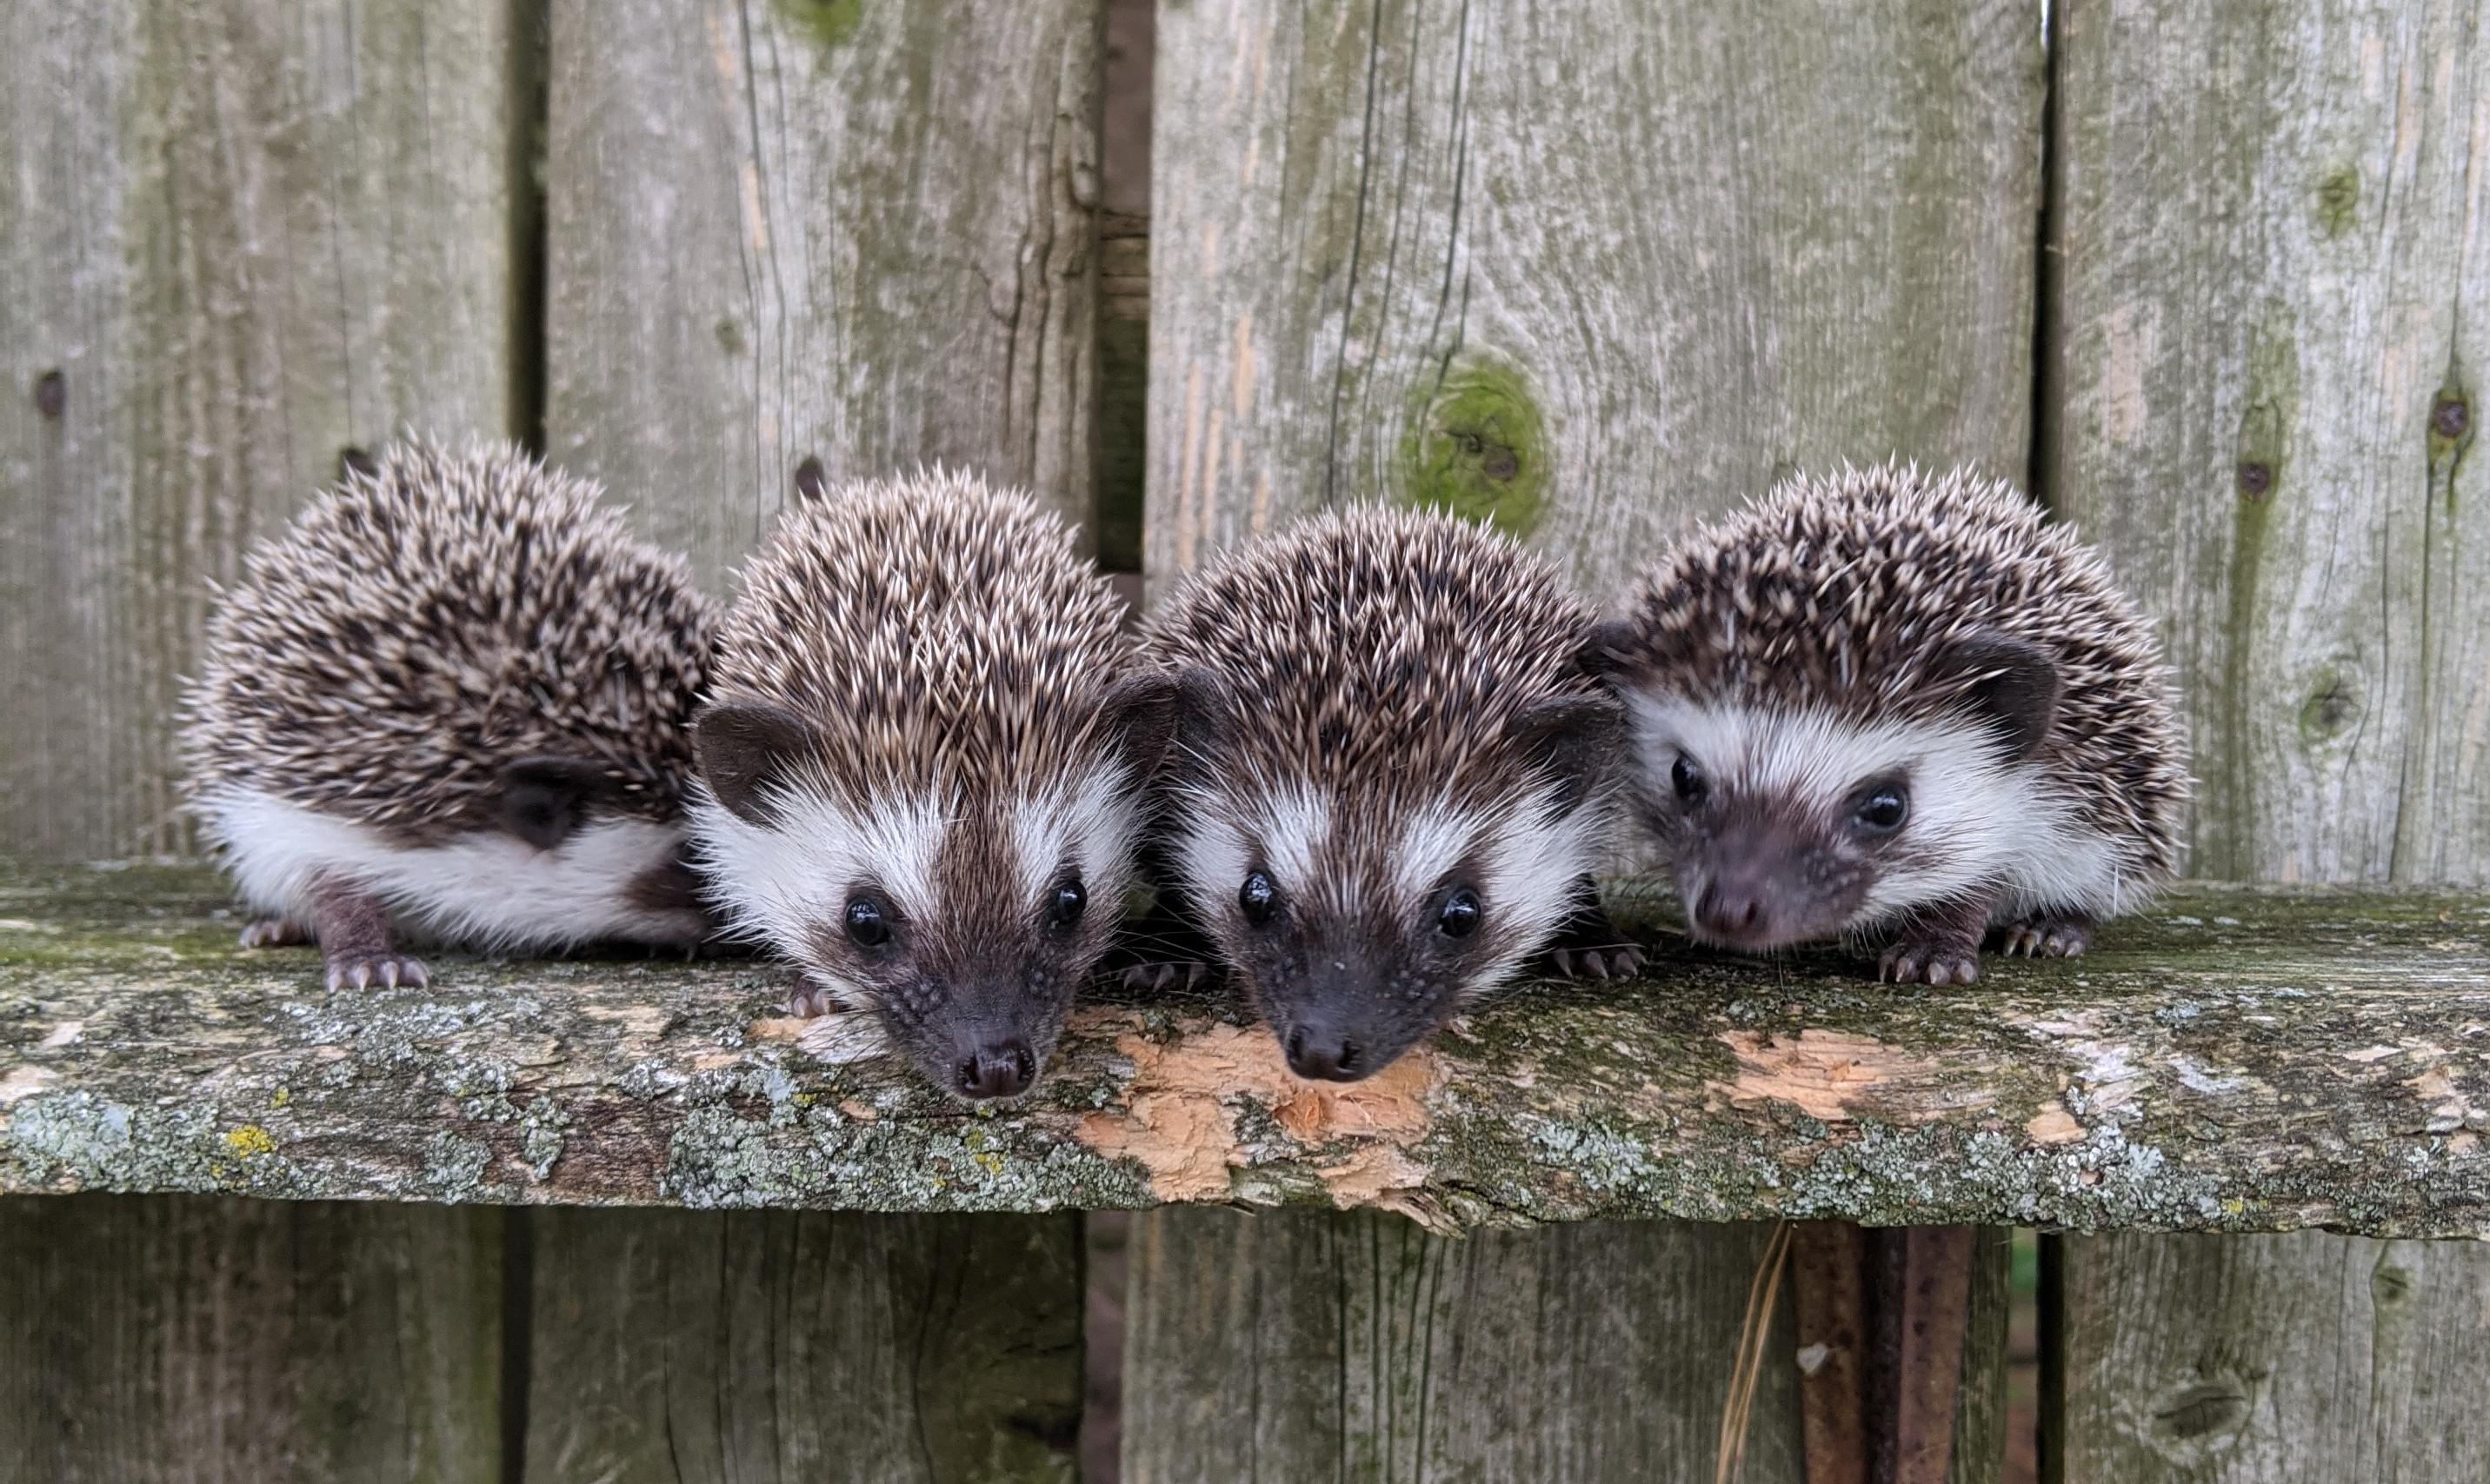 What is a prickle of hedgehogs?